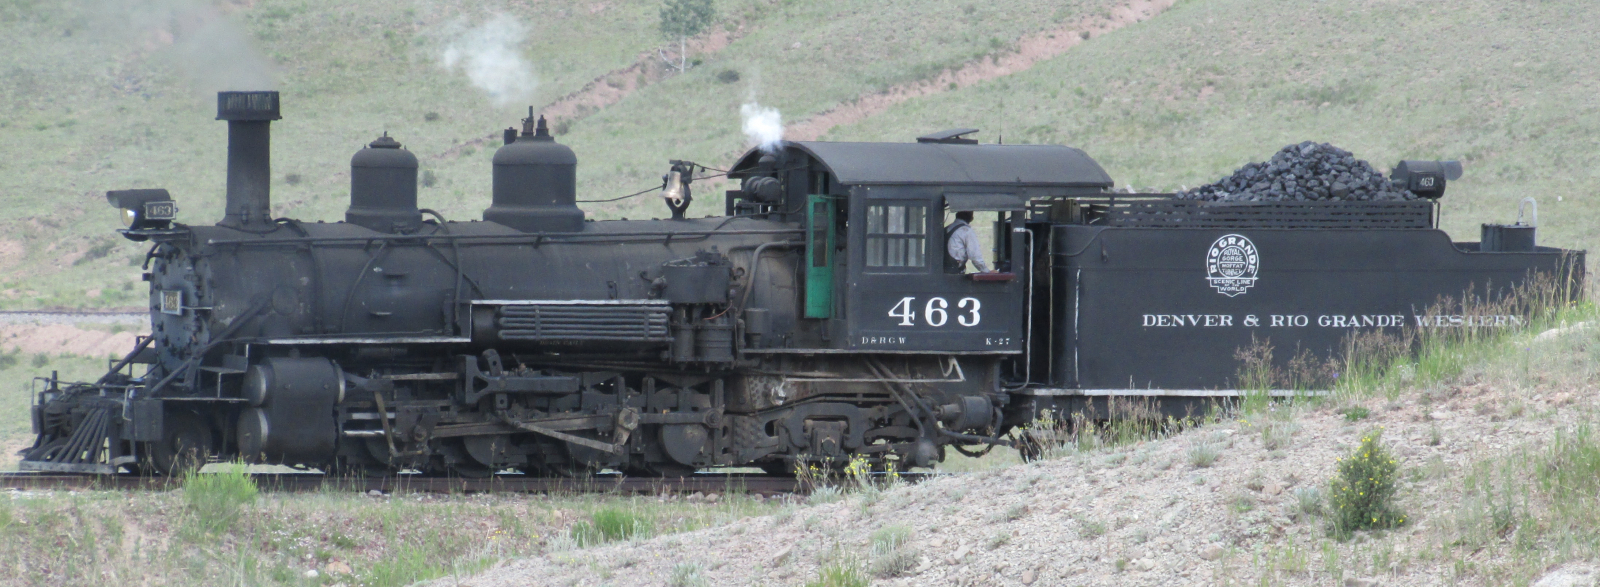 No. 463 in July 2016 on the Cumbres and Toltec Scenic Railroad